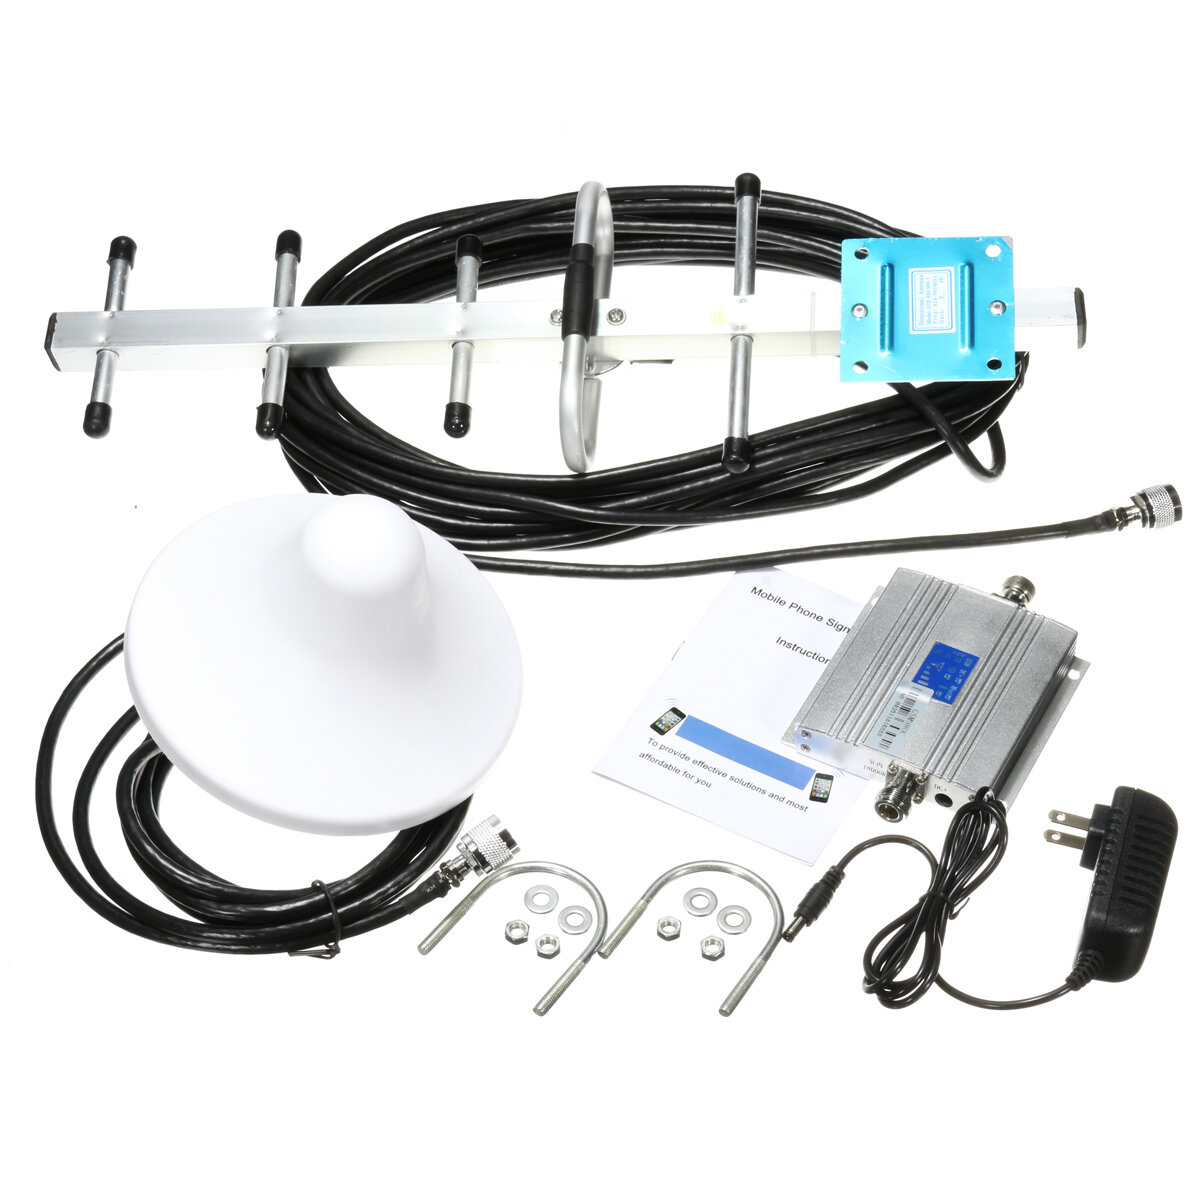 Image of 110-240V LCD GSM 900Mhz Cell Phone Signal Repeater Booster Amplifier+Yagi Antenna Kit